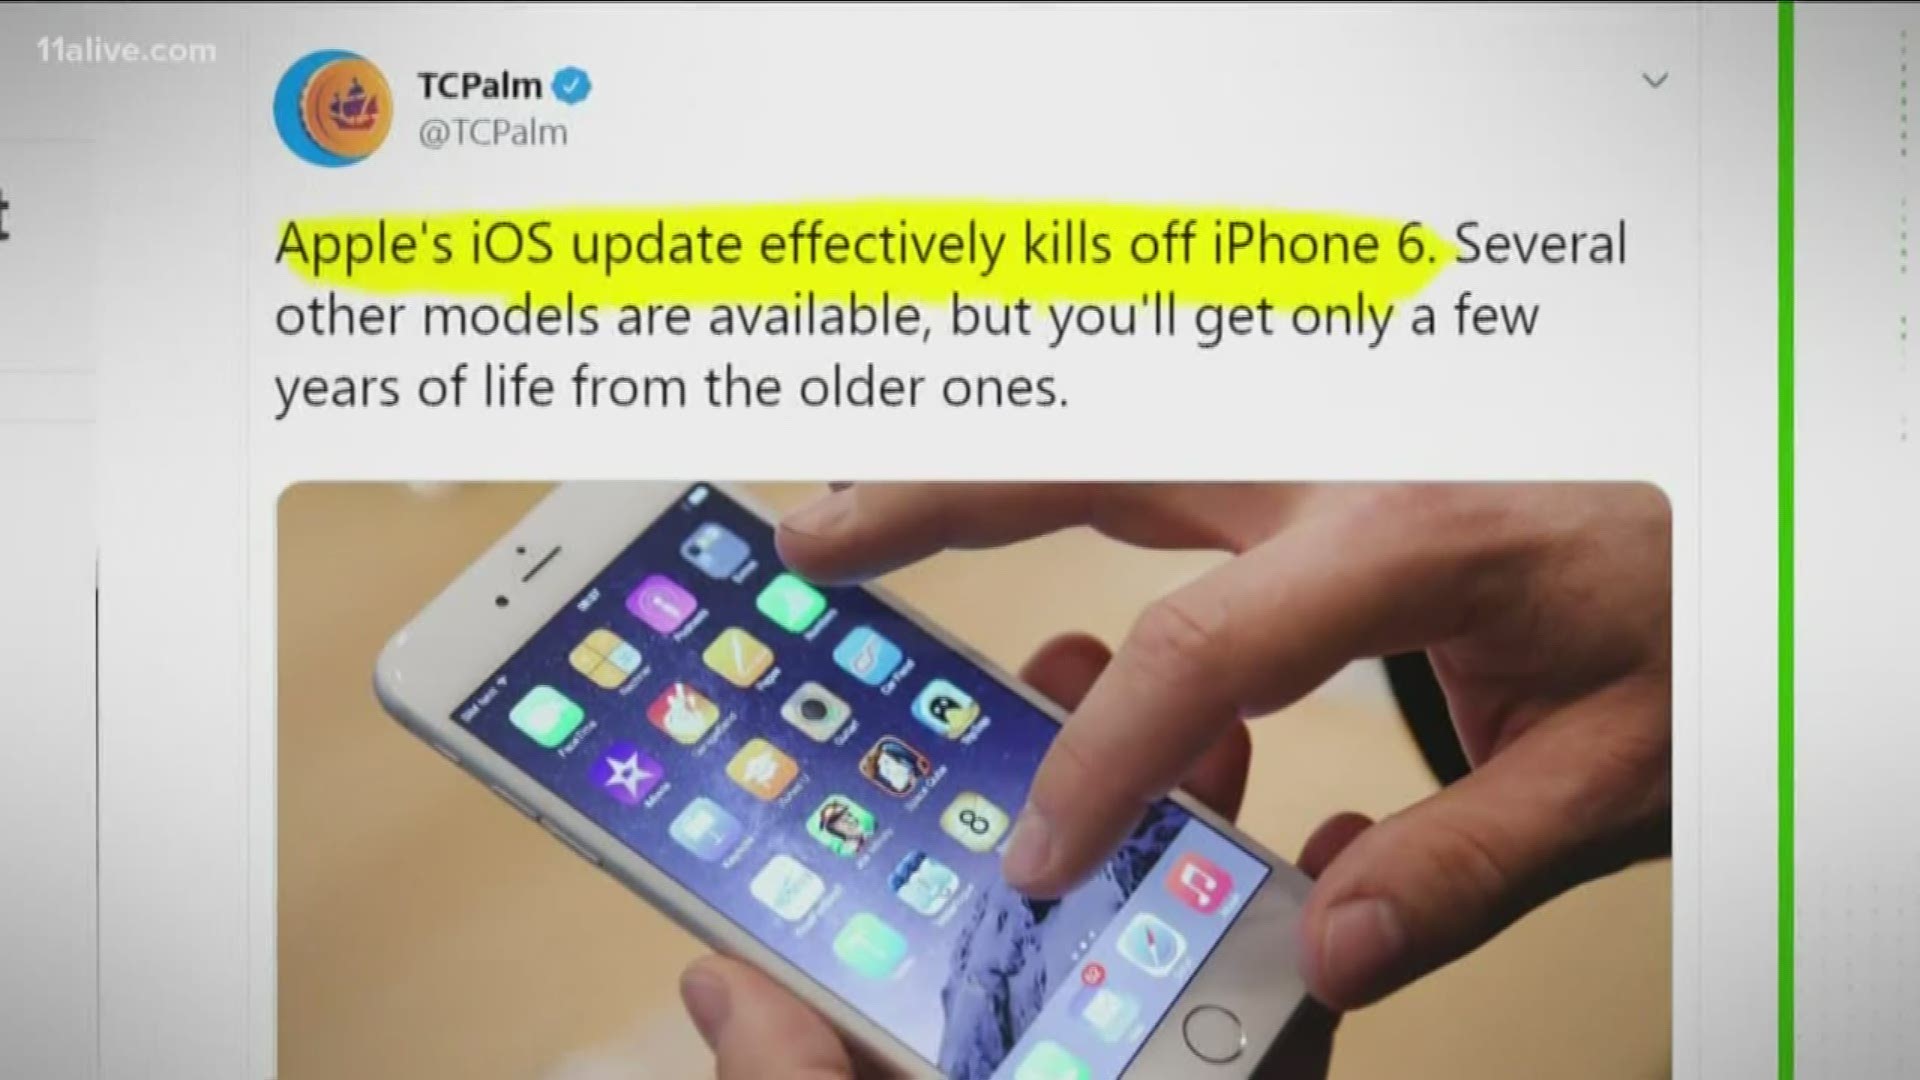 Claims that the Apple's upcoming new operating service will make it so you can't use an iPhone 6 at all are a bit misleading.